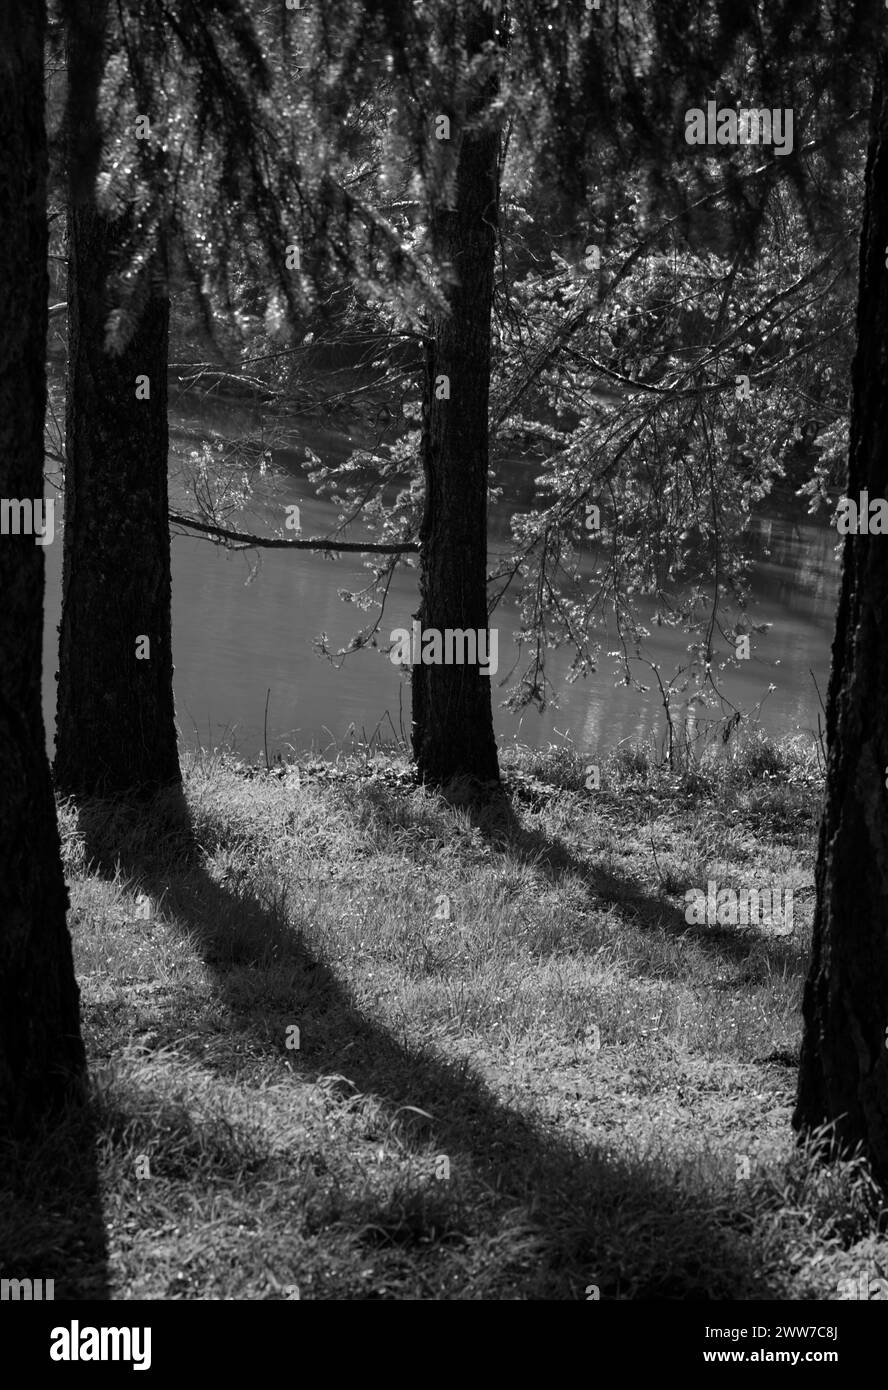 Lakeshore zone with several tree trunks In beautiful light in black and white Stock Photo